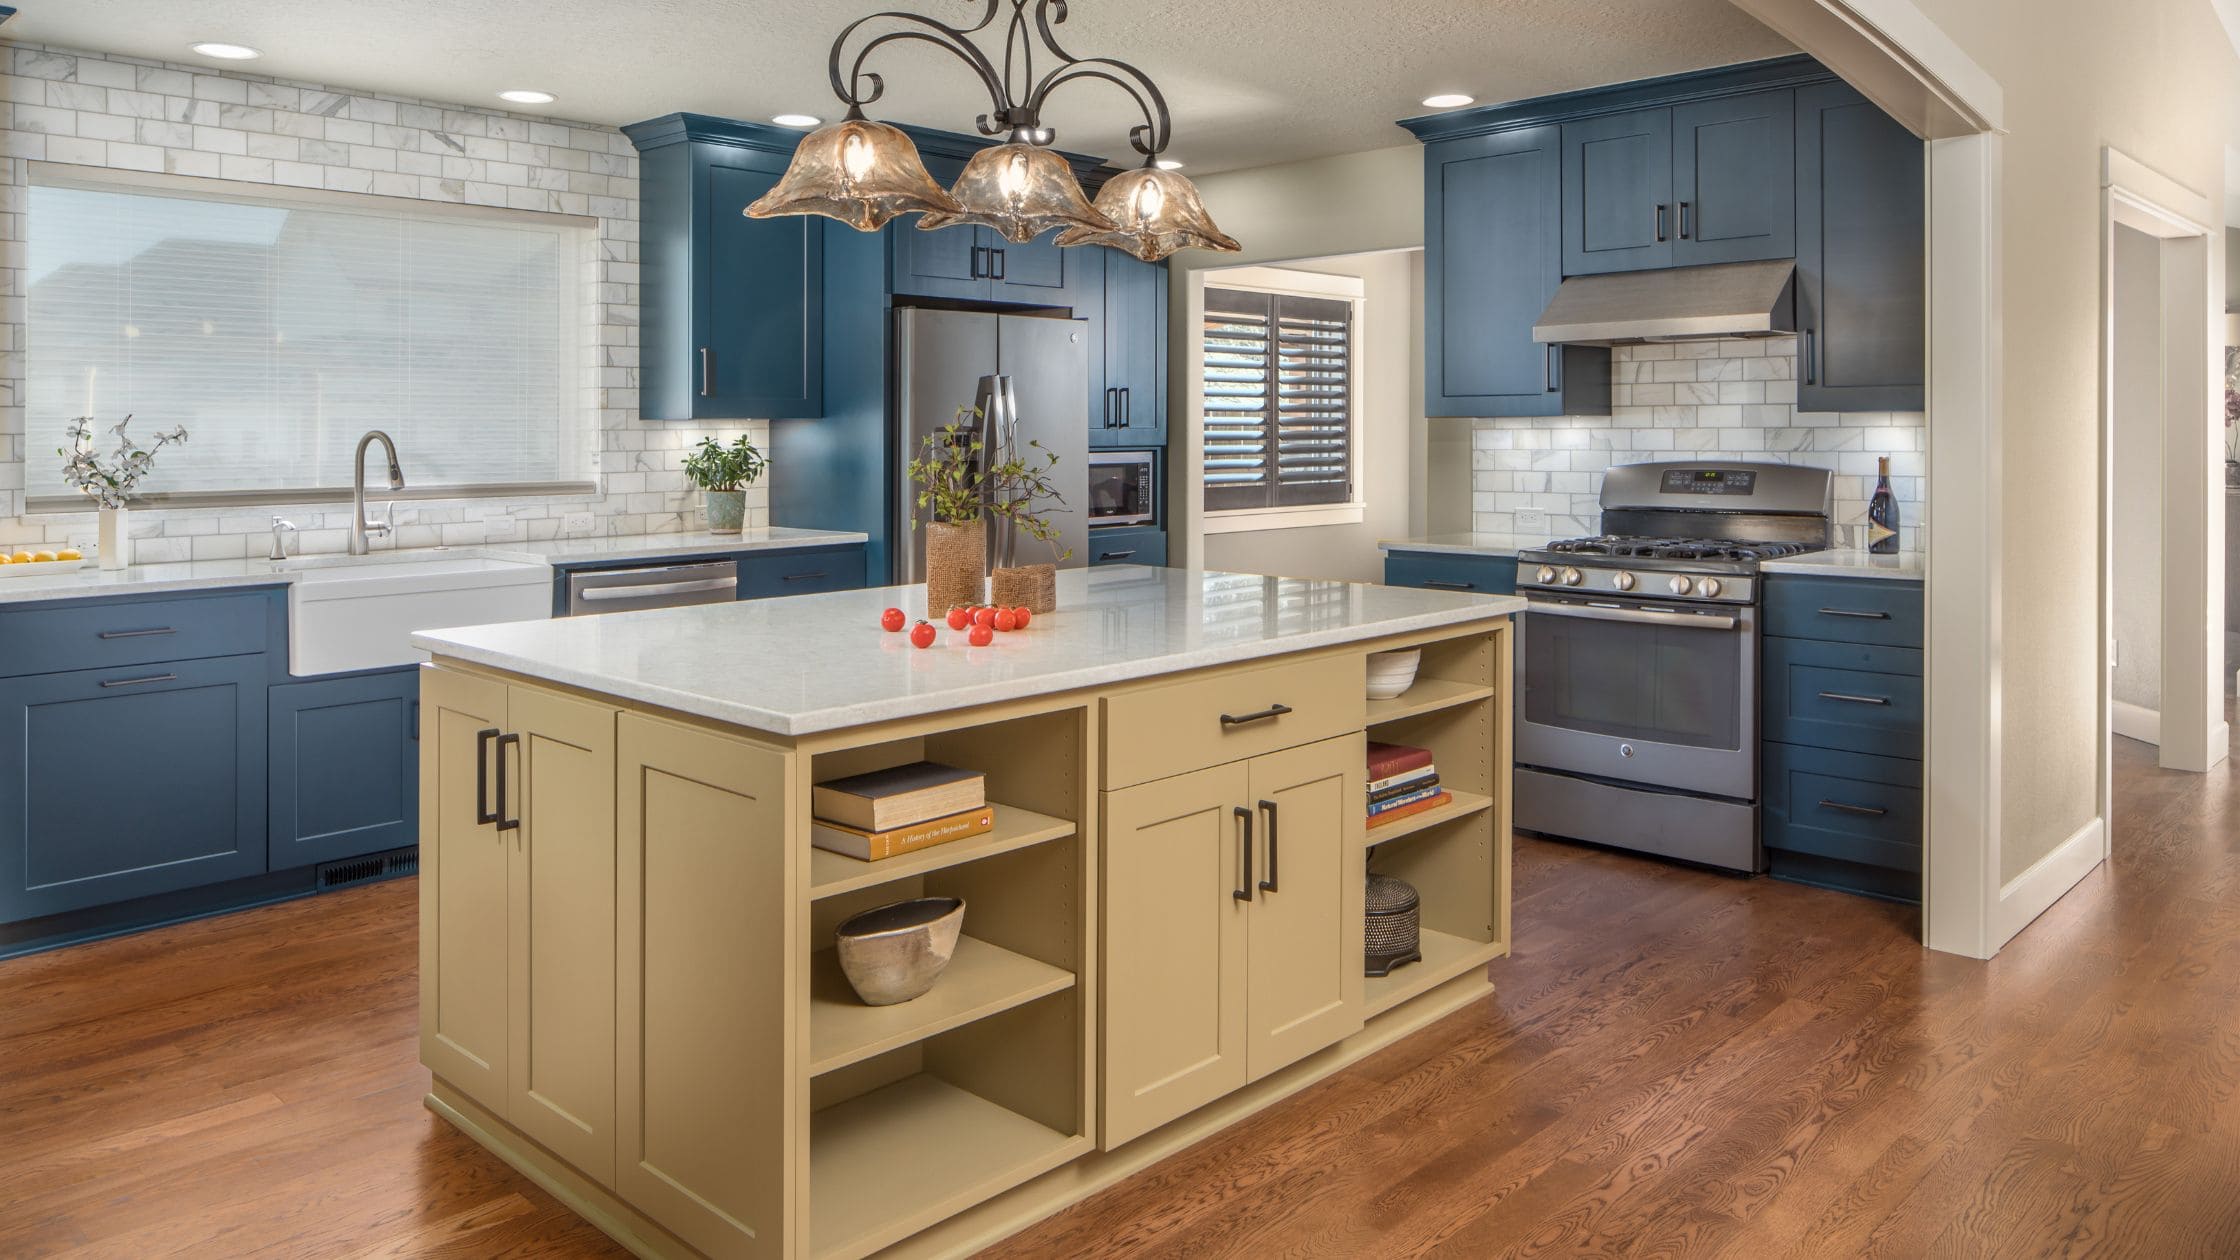 9 Kitchen Trends to Avoid in 2022 & 2023